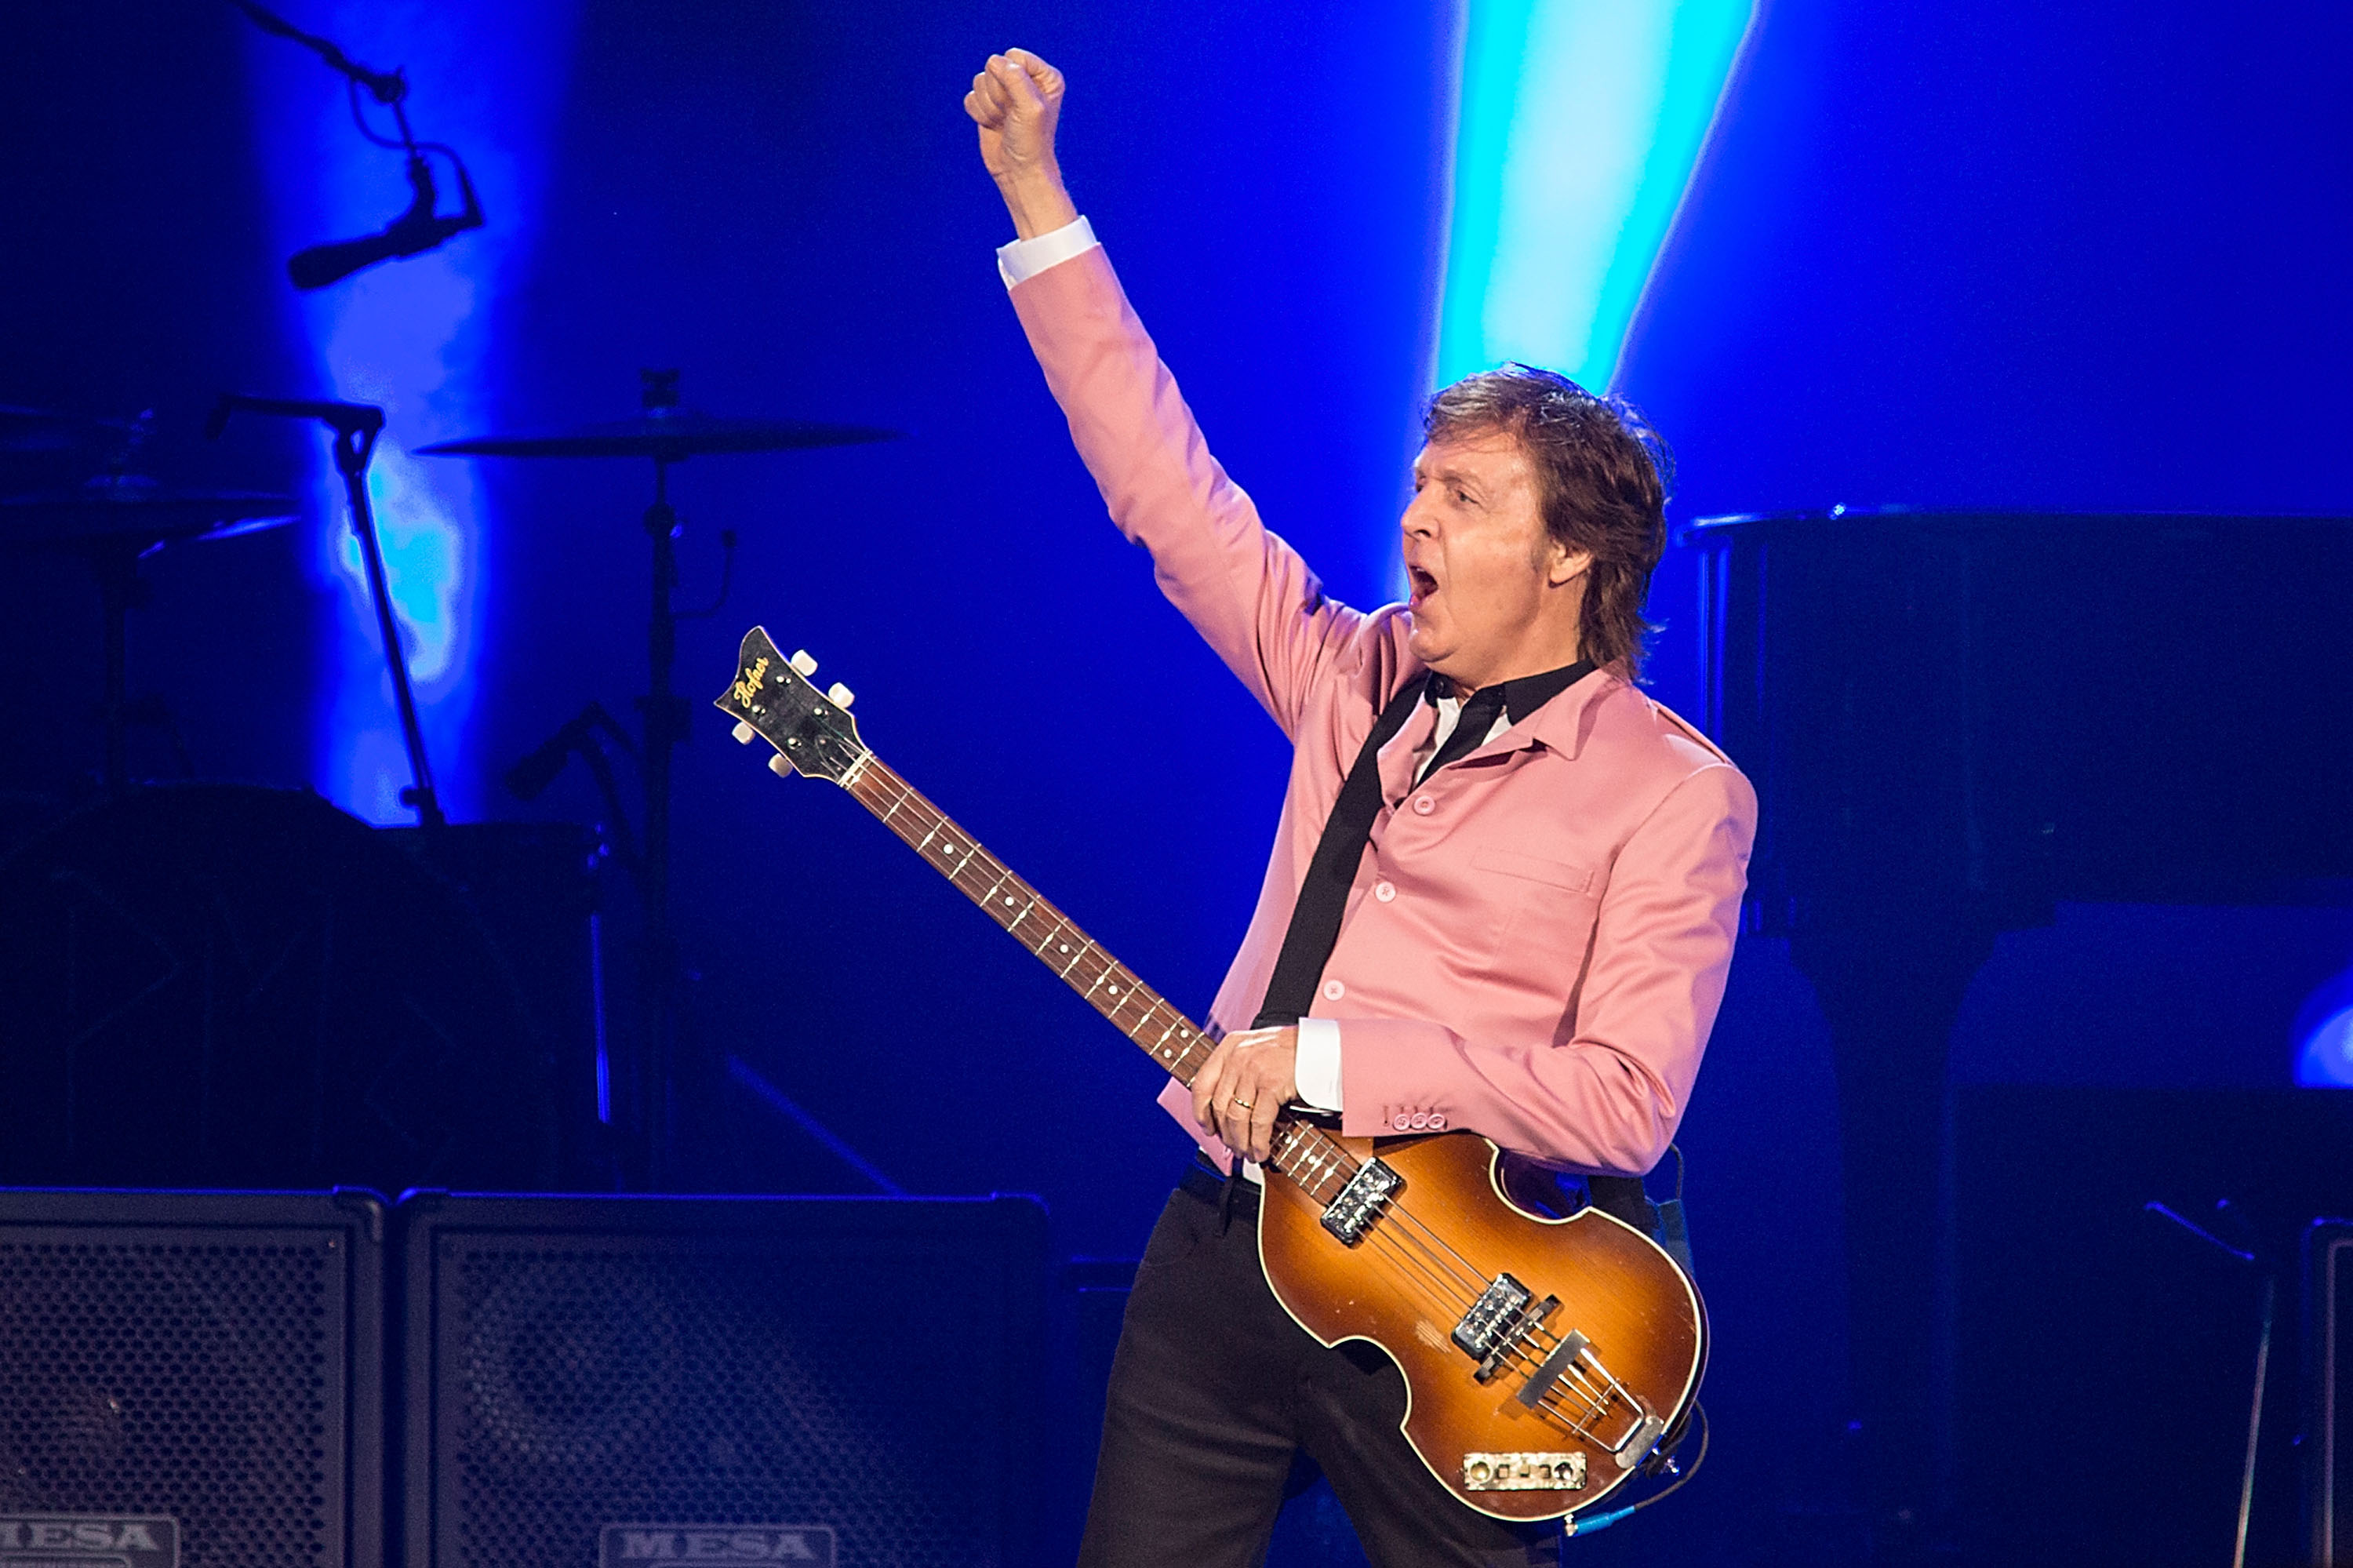 Paul McCartney performs at The Frank Erwin Center in Austin, Texas